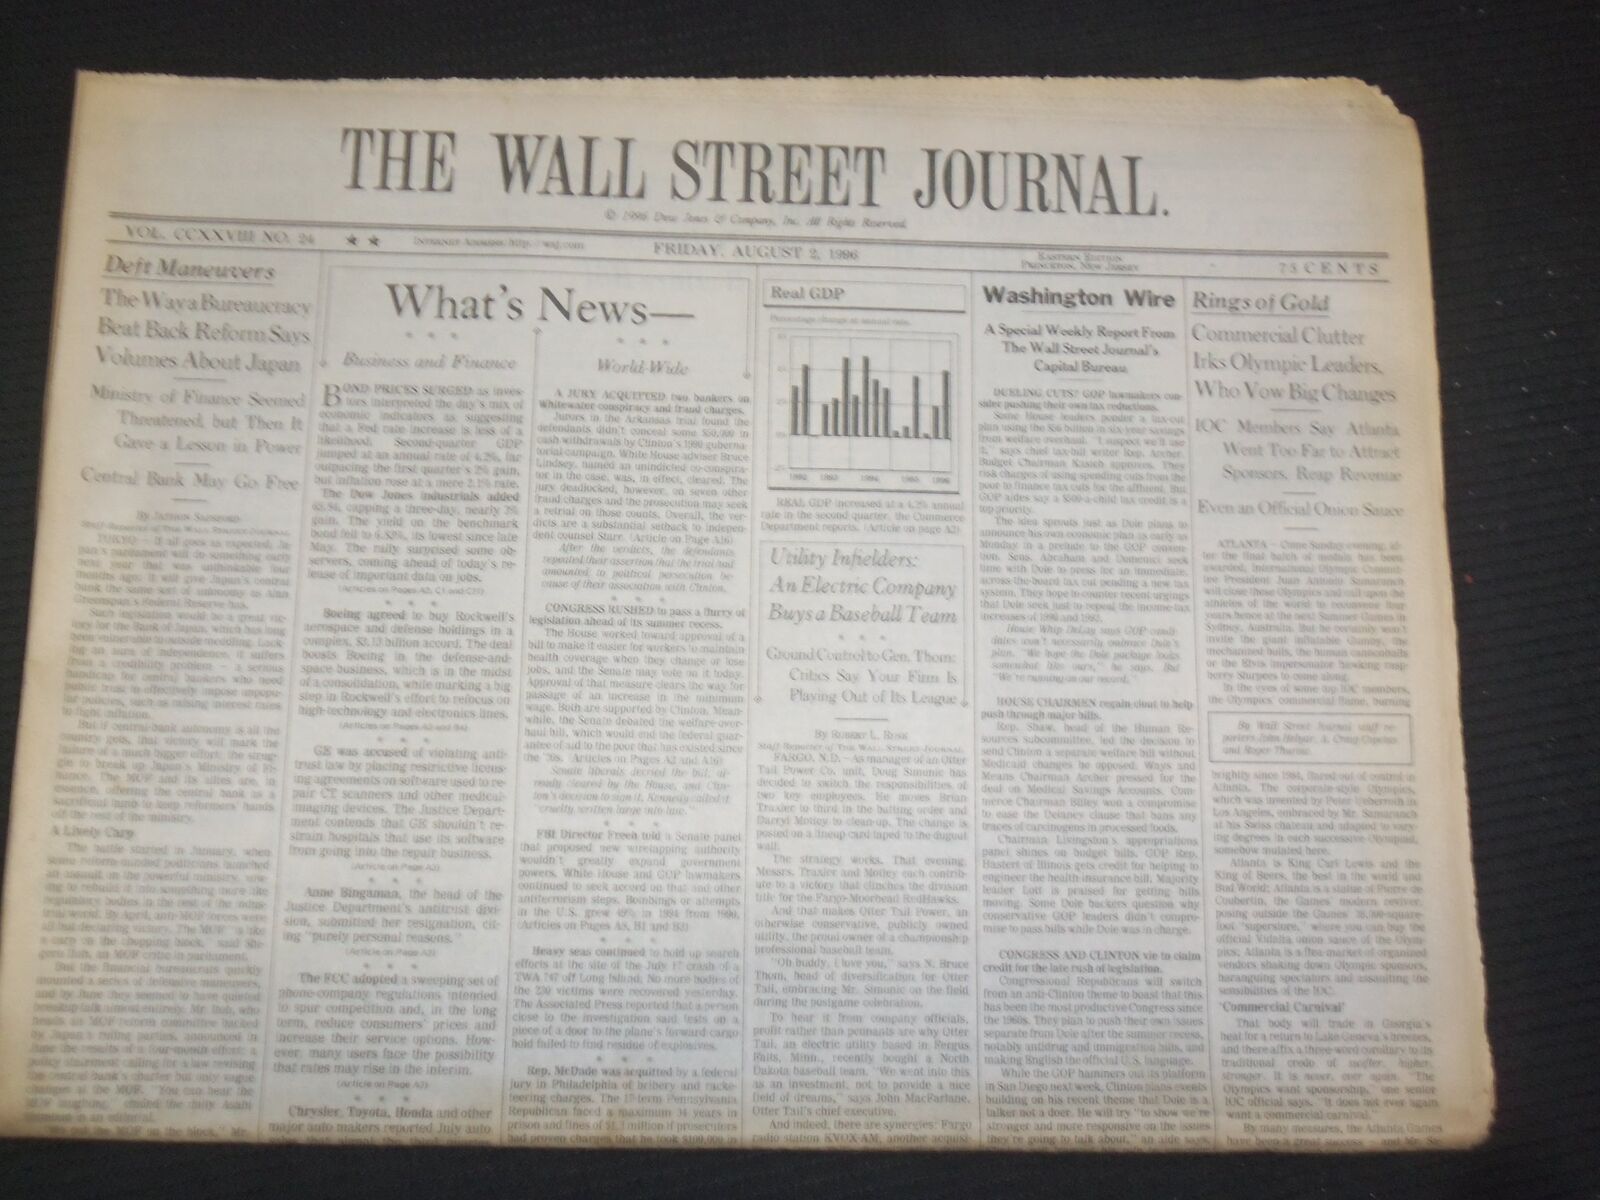 1996 AUG 2 THE WALL STREET JOURNAL-COMMERCIAL CLUTTER IRKS OLYMPIC LEADER-WJ 286